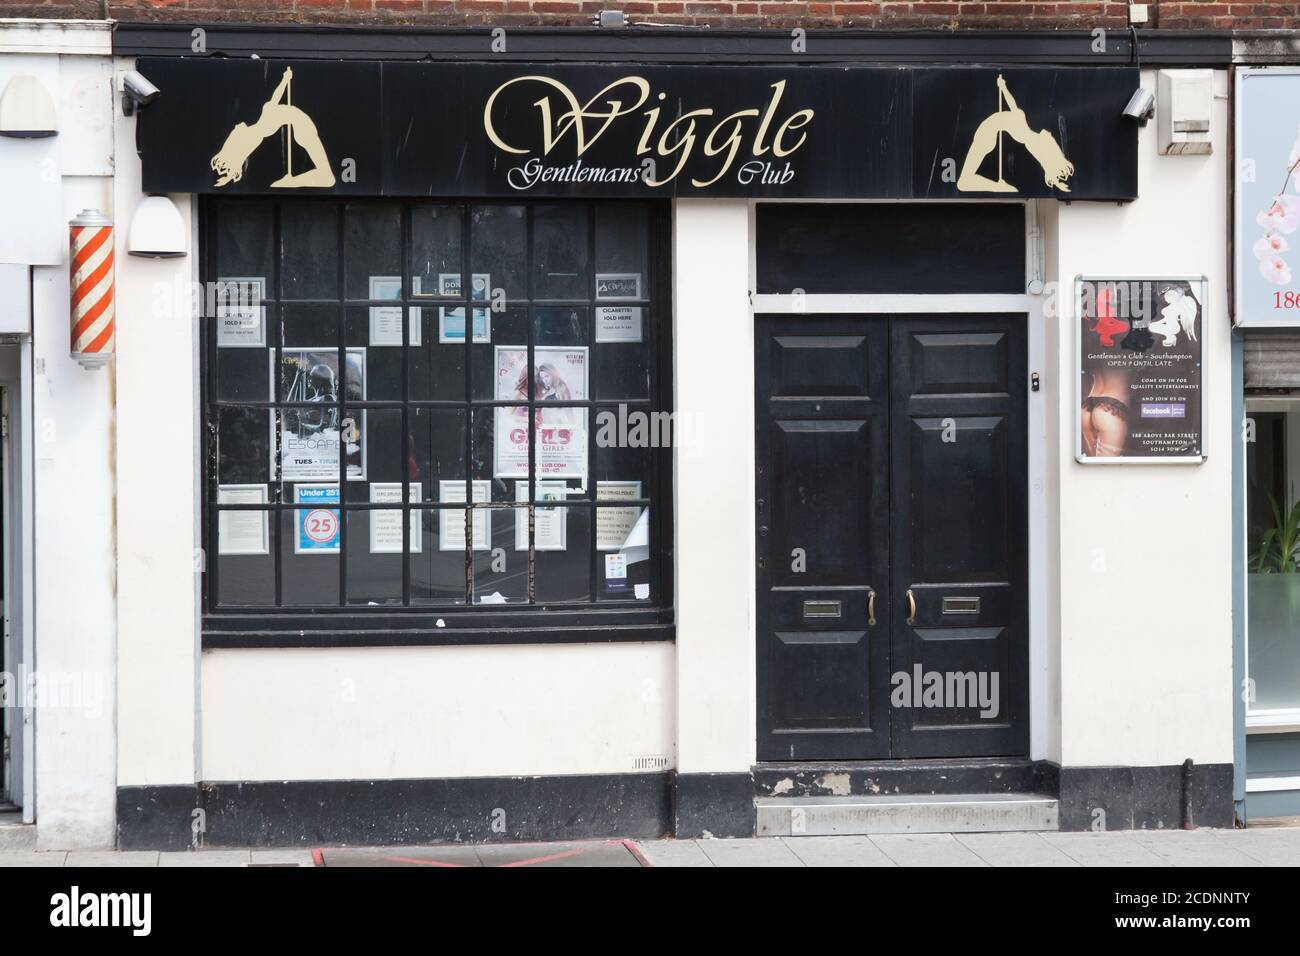 Wiggle Gentlemen's Club in Southampton, Hampshire in the UK, taken on the 10th July 2020 Stock Photo